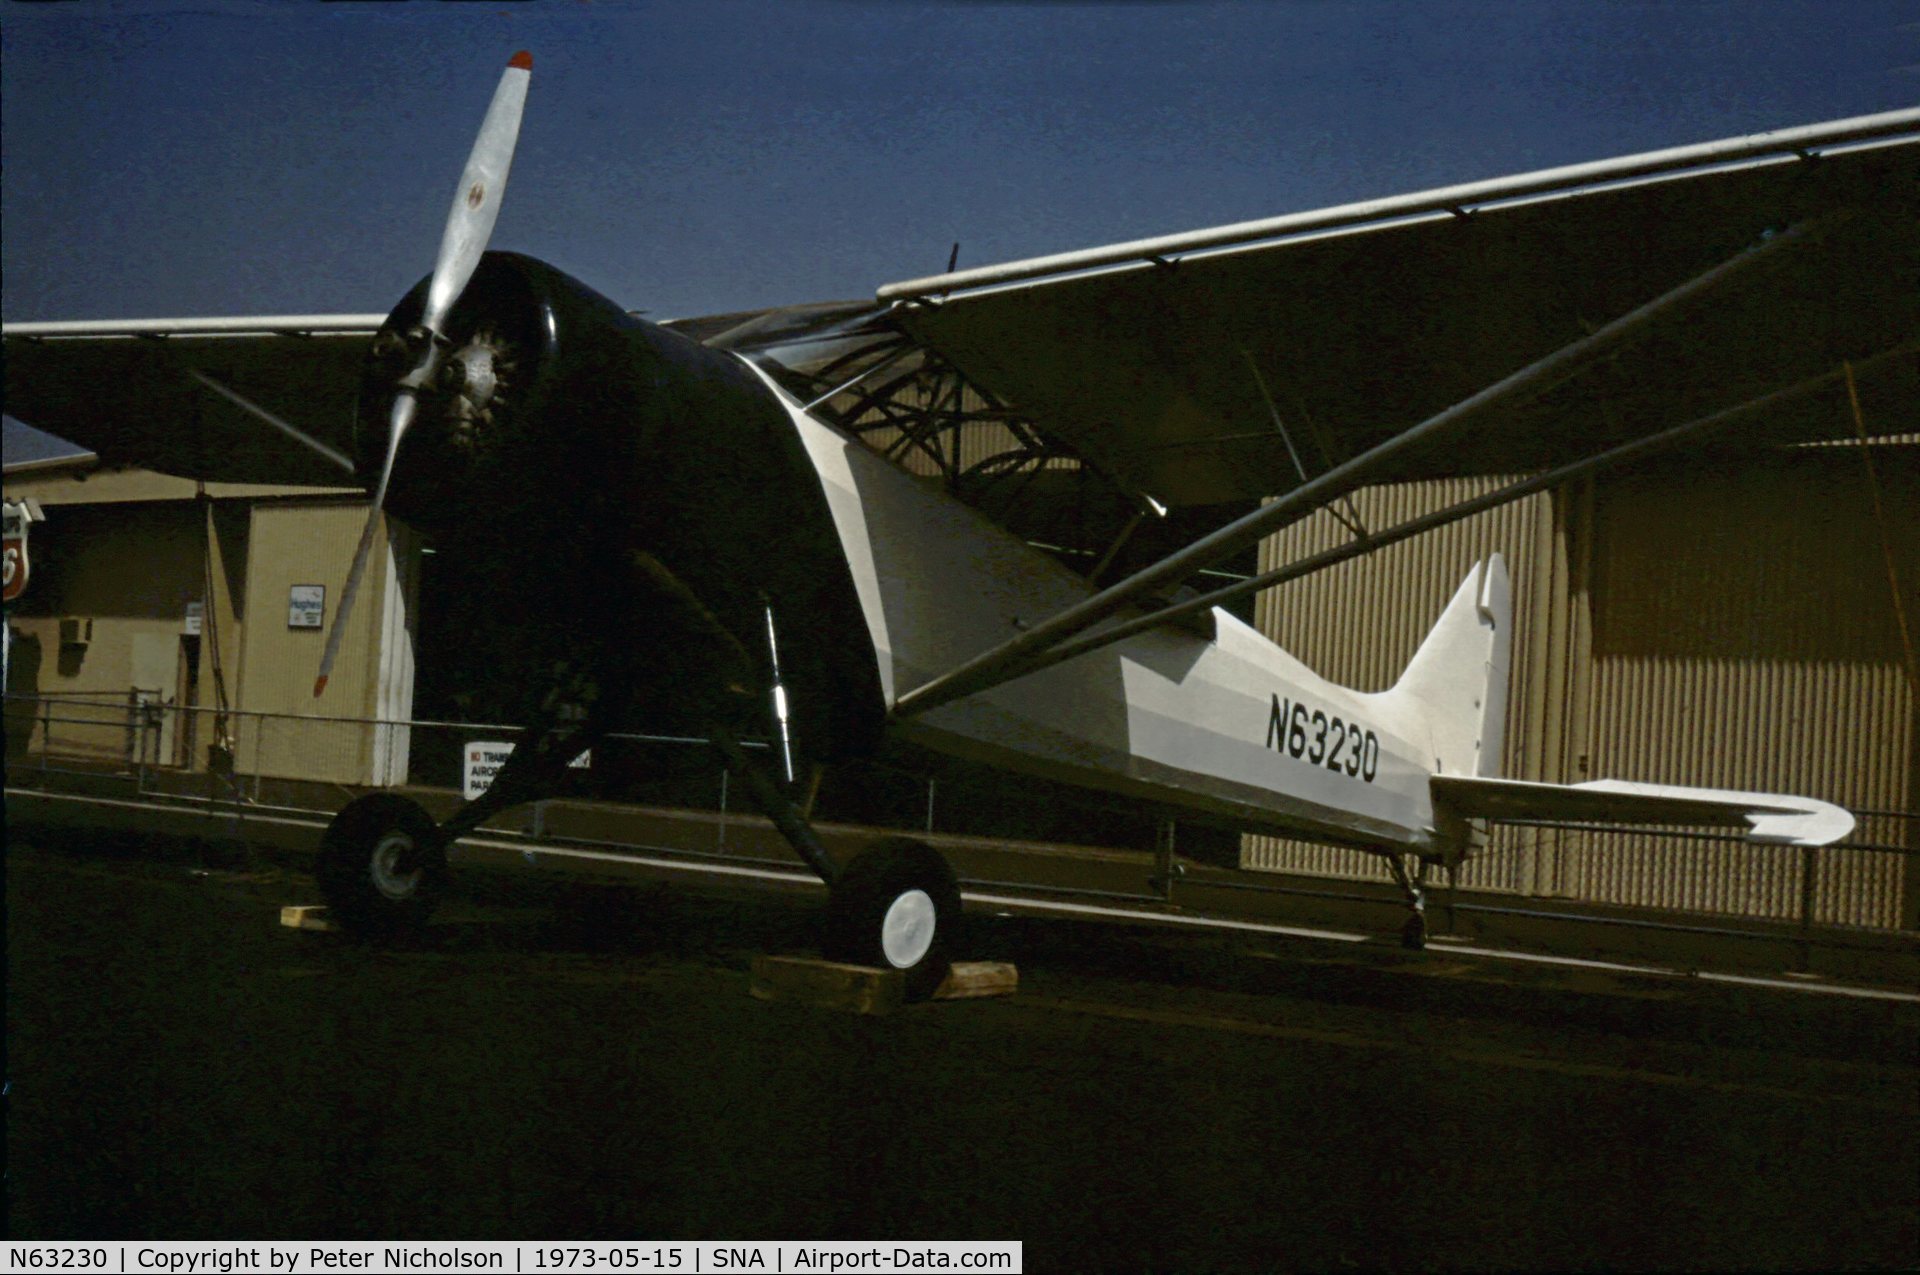 N63230, 1941 Stinson L-1 C/N 40-3102, In 1973 this Vigilant was part of the Tallmantz Collection at Orange County Airport.